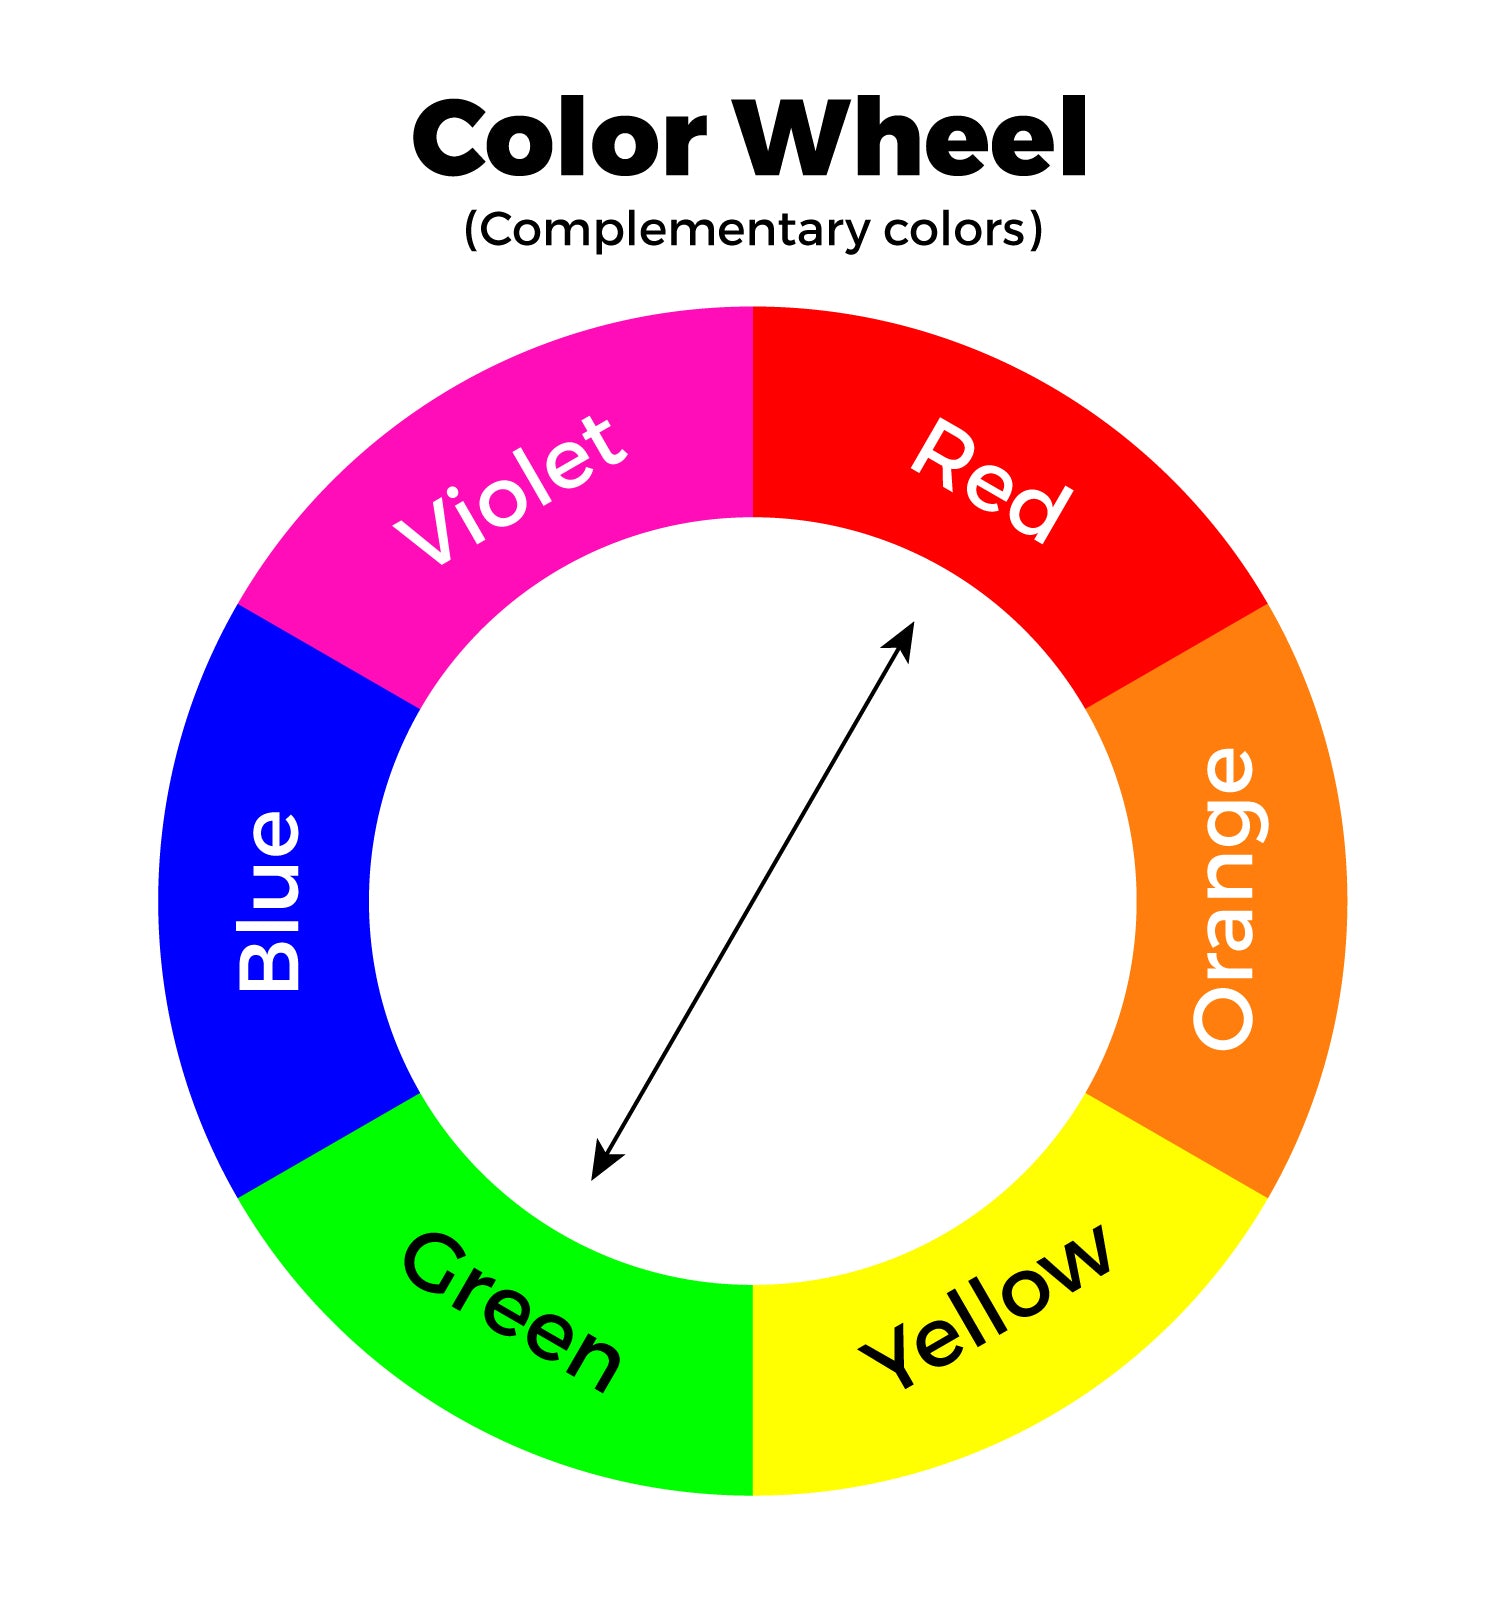 Red-and-Green-Complementary-Color-Wheel-with-Color-Names